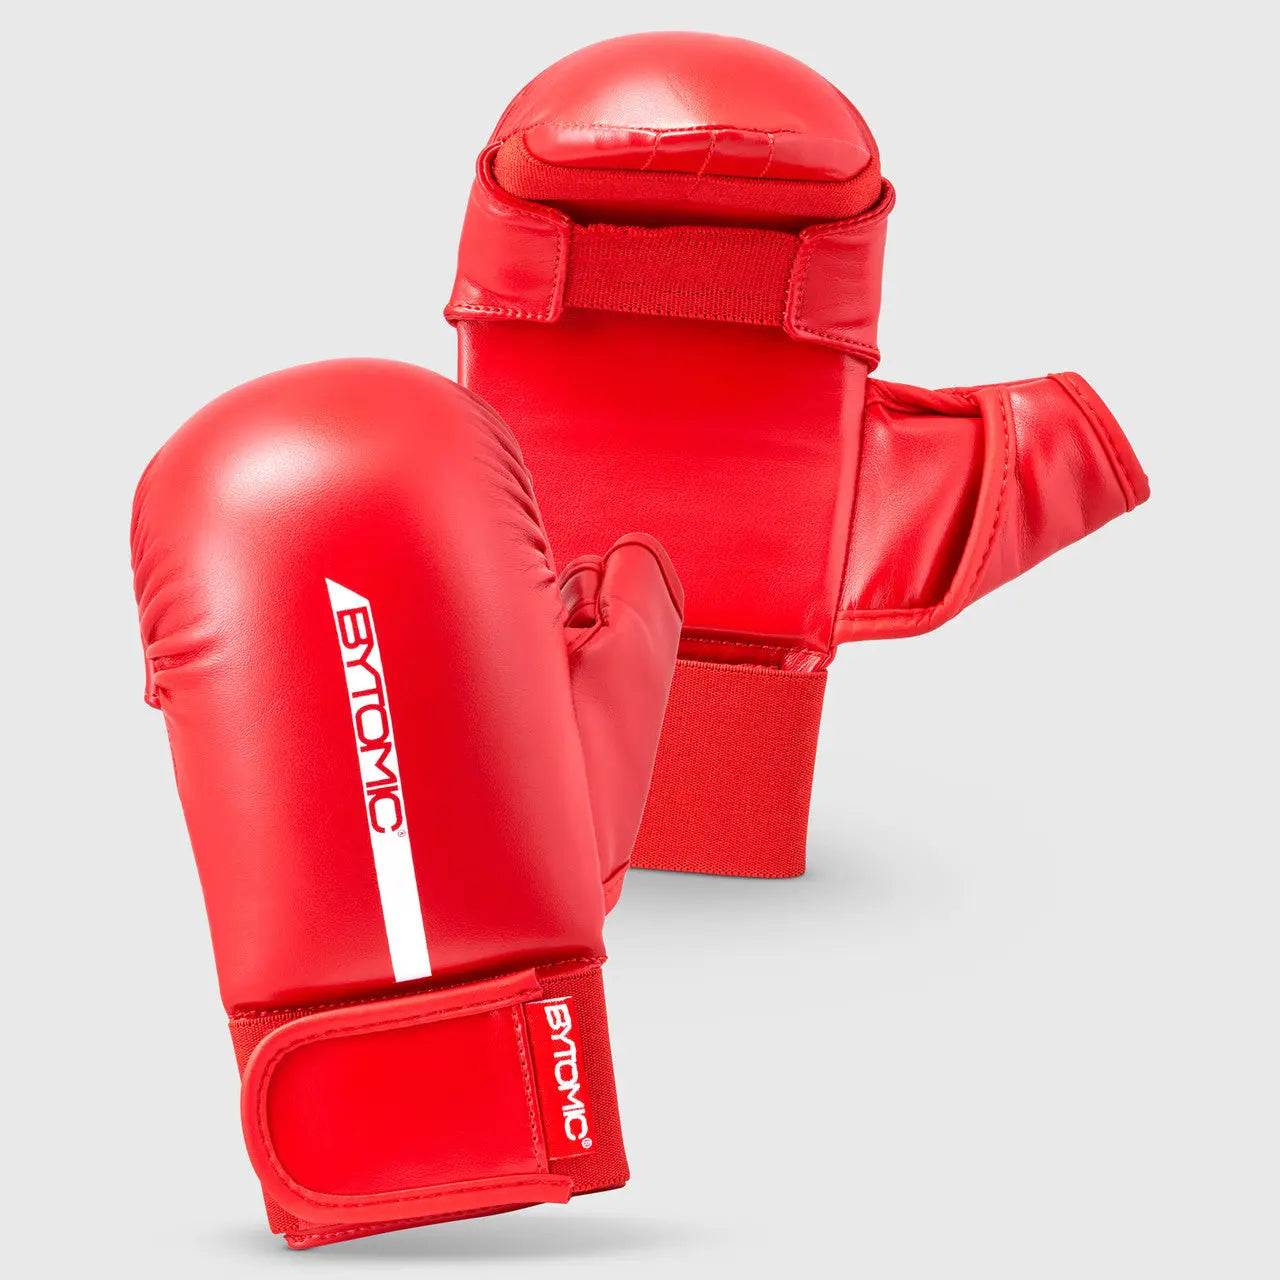 Bytomic Red Label Karate Mitt with Thumb Bytomic